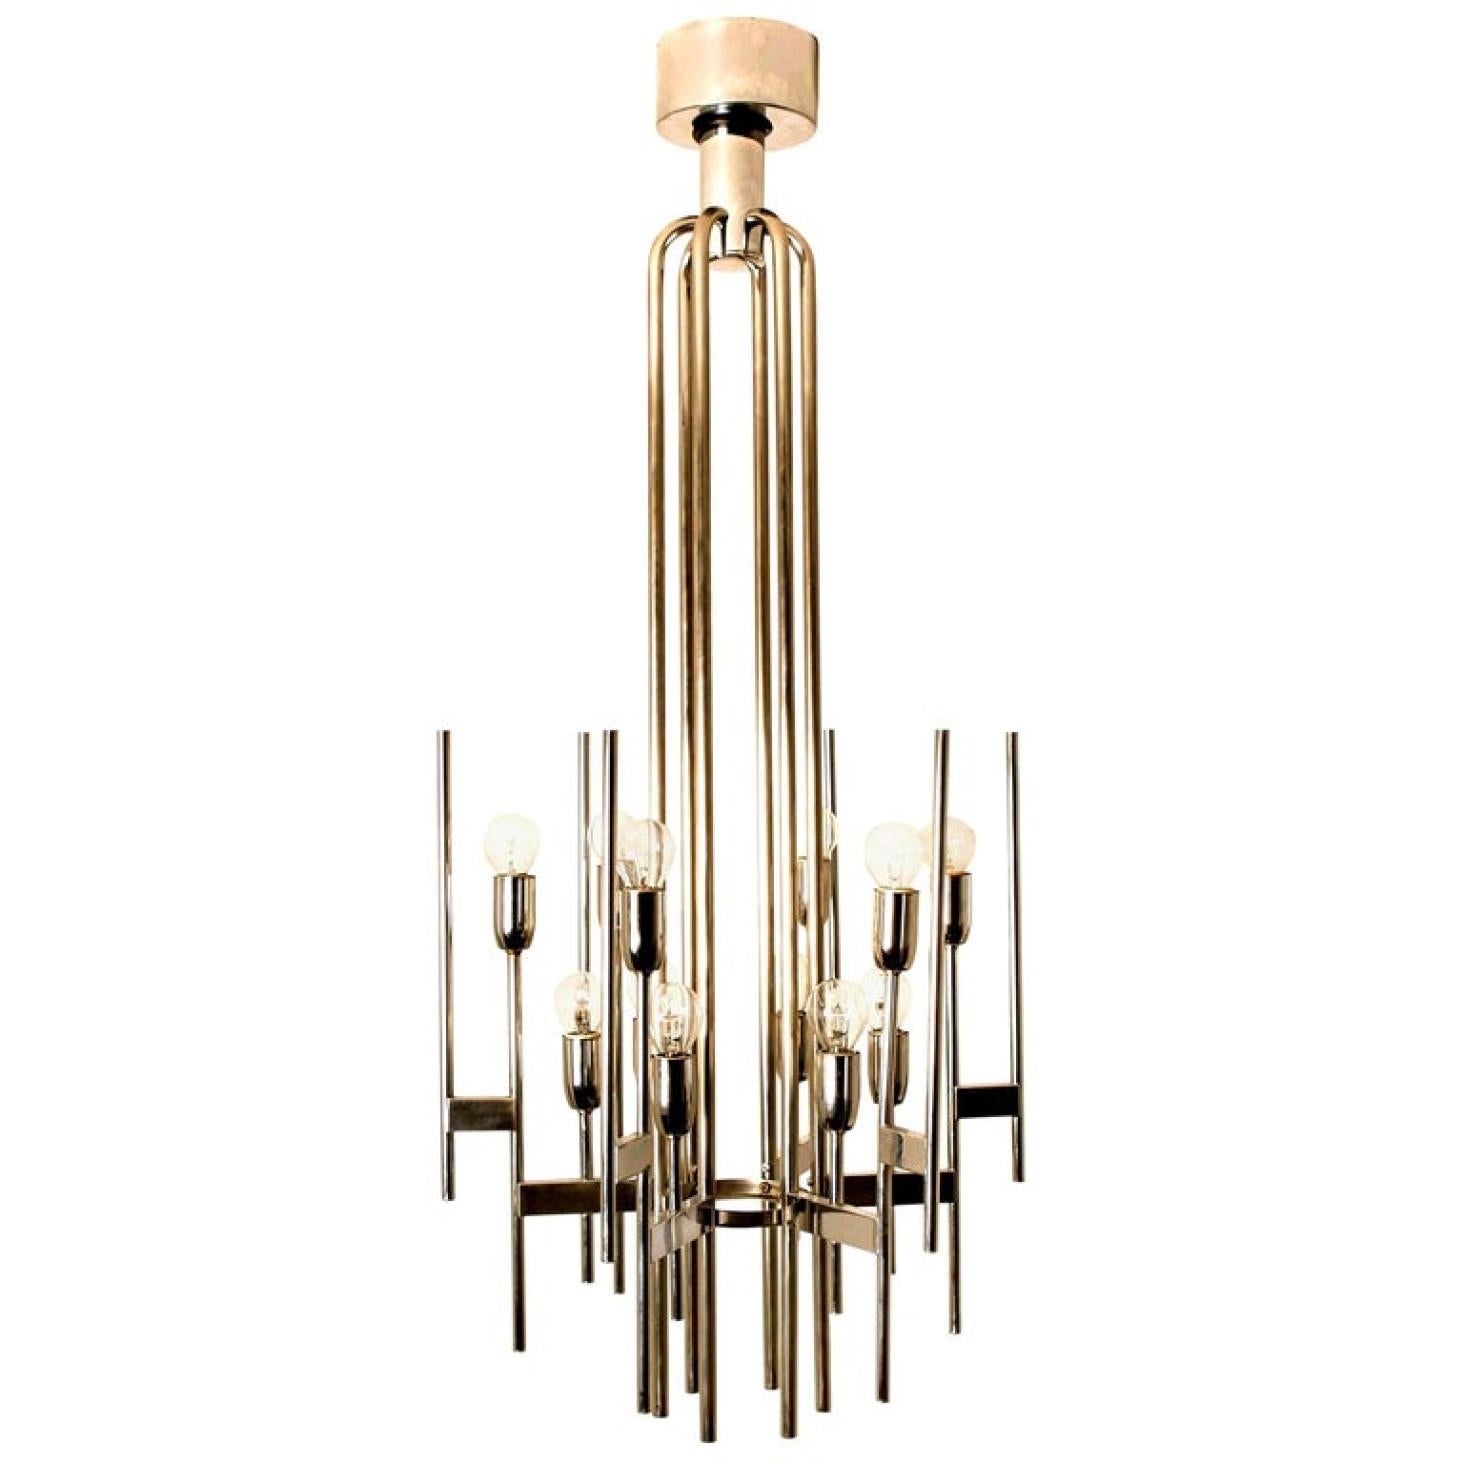 Italian Mid-Century Modern minimal sculptural chrome chandelier by Gaetano Sciolari, Italy, 1960s.
Beautiful Art Deco inspired design. Minimalistic design executed with a taste for excellence in craftsmanship.

Cleaned and well-wired, in full